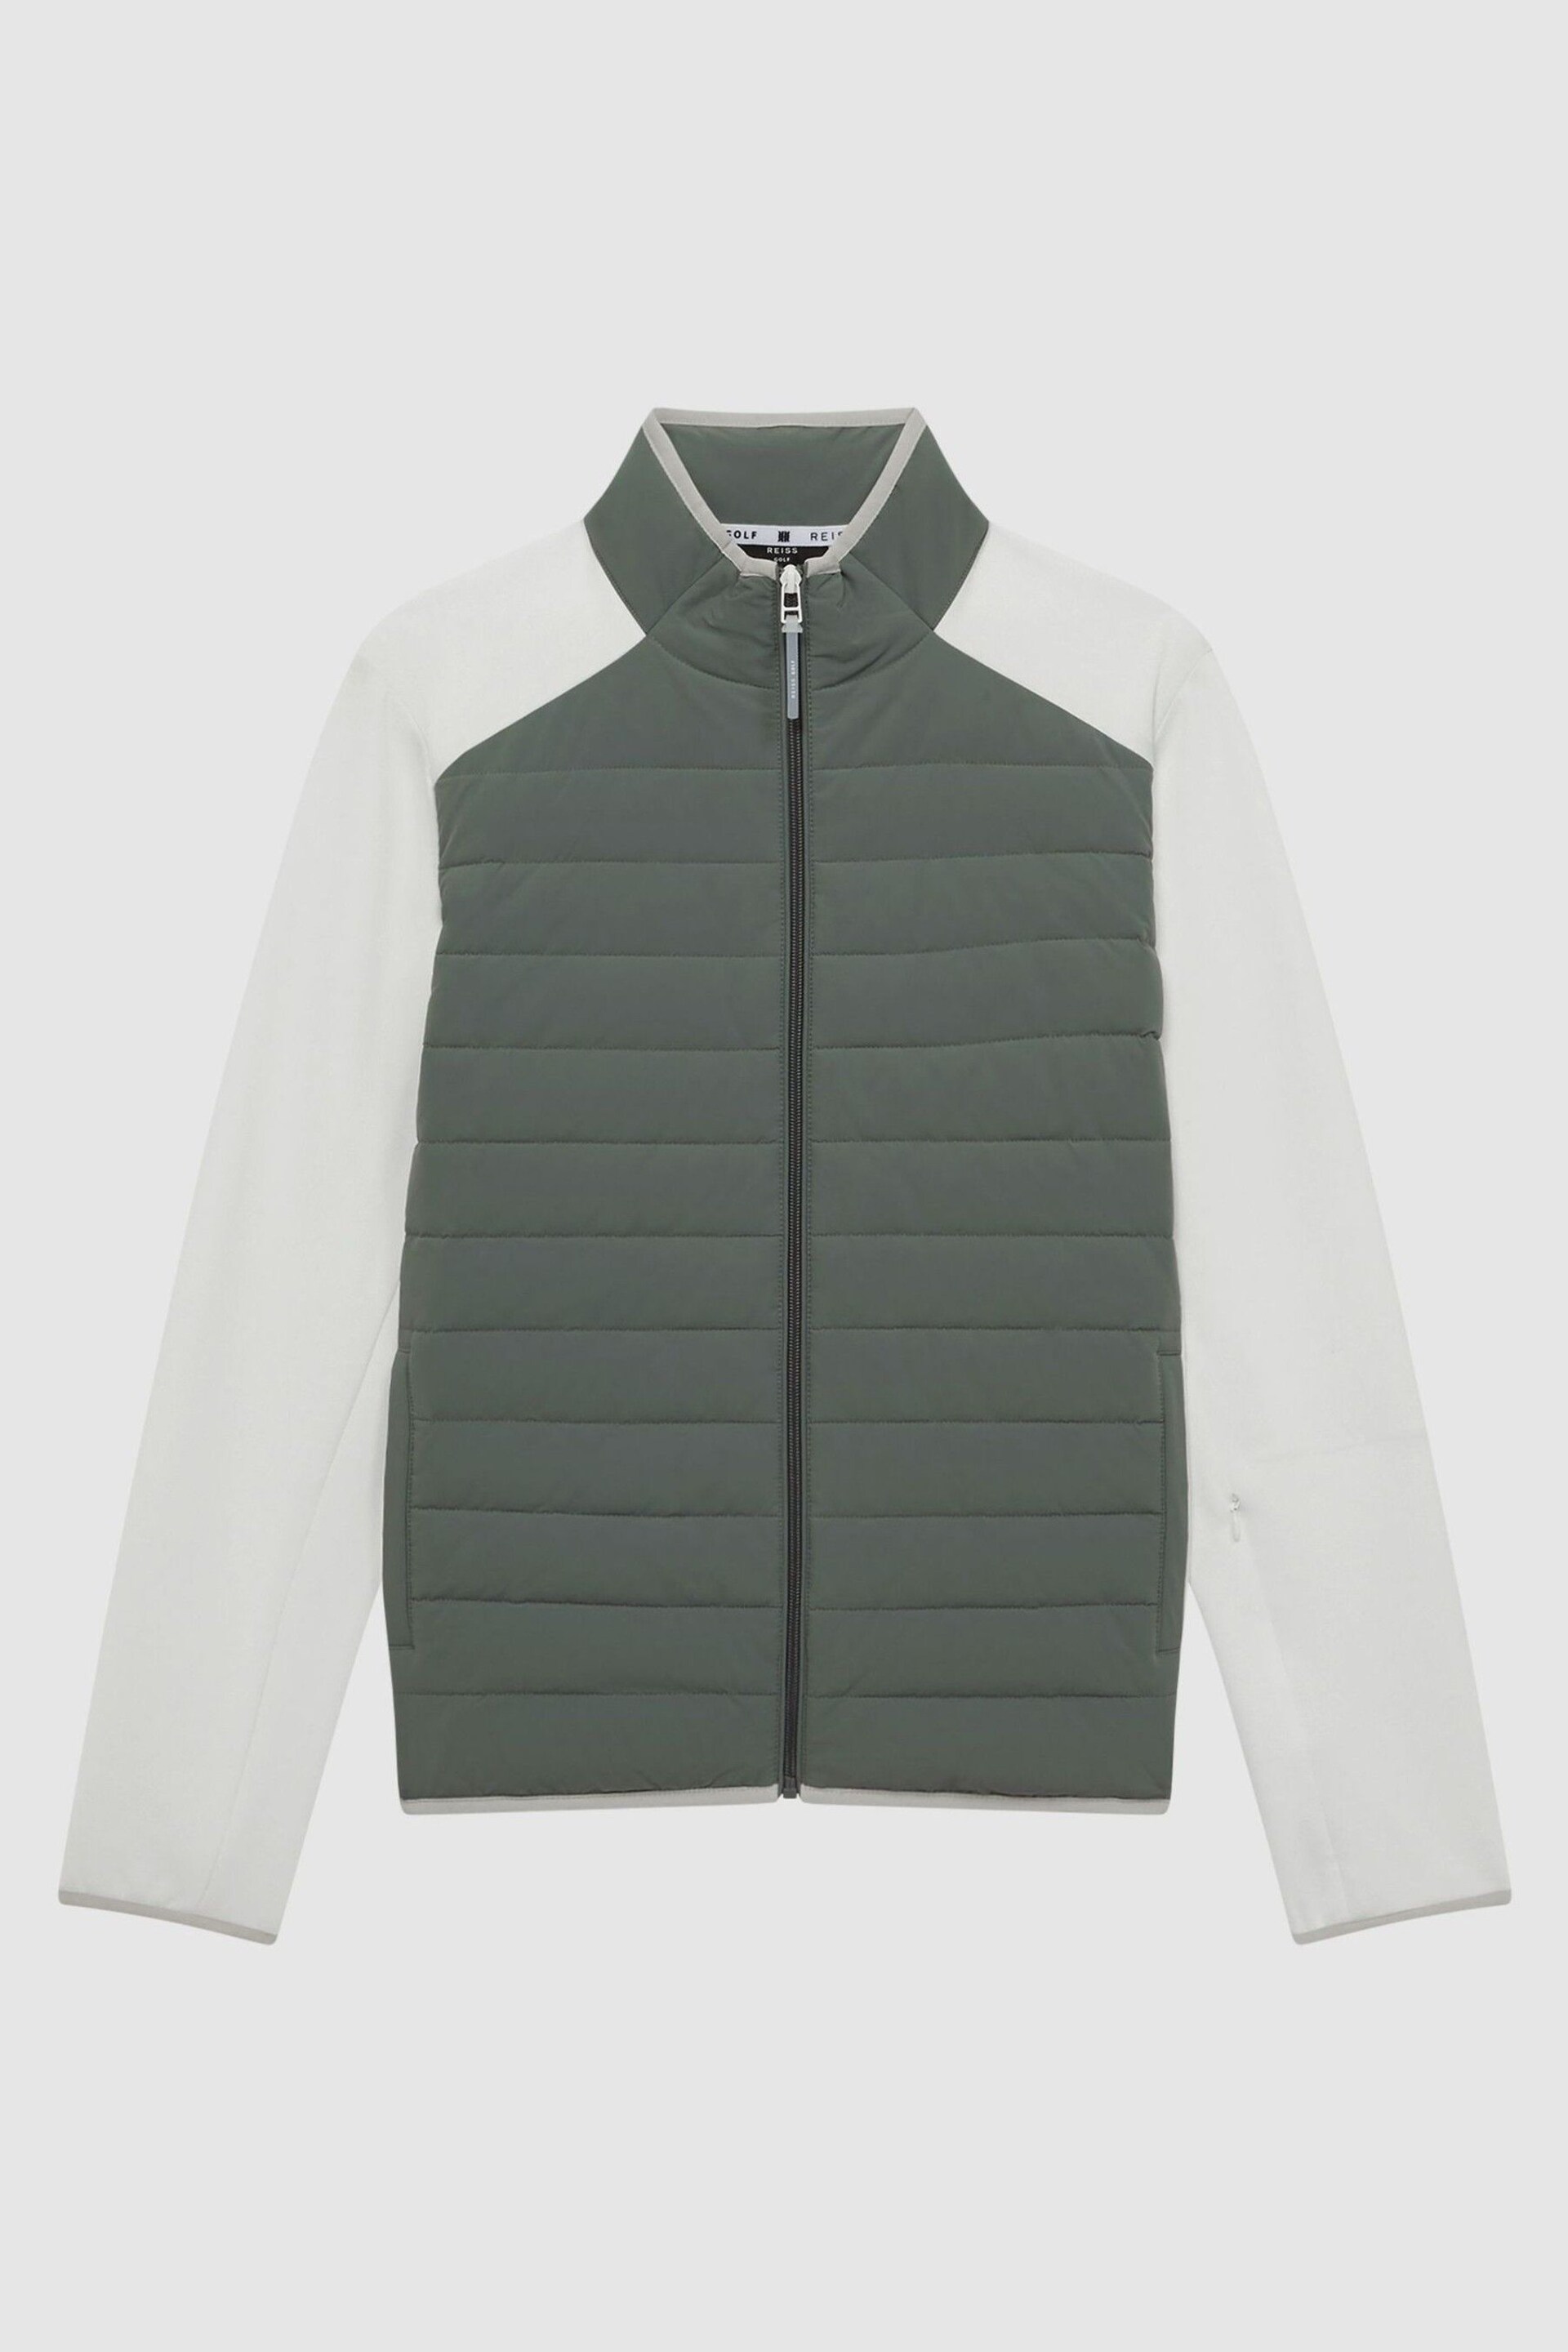 Reiss Sage/White Player Funnel Neck Hybrid Quilted Jacket - Image 2 of 7